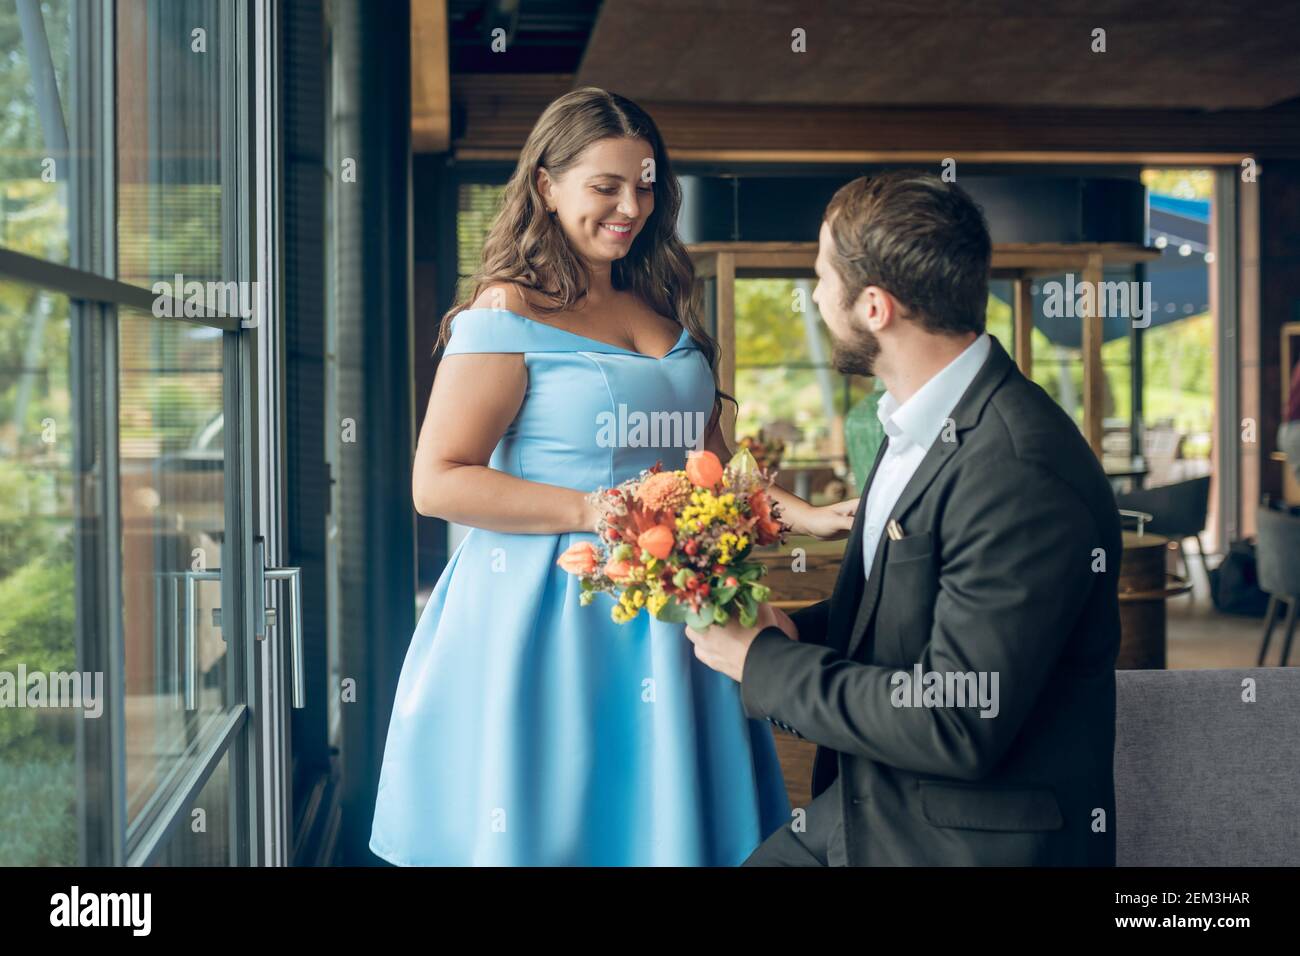 Beautiful smiling woman and man holding flowers Stock Photo